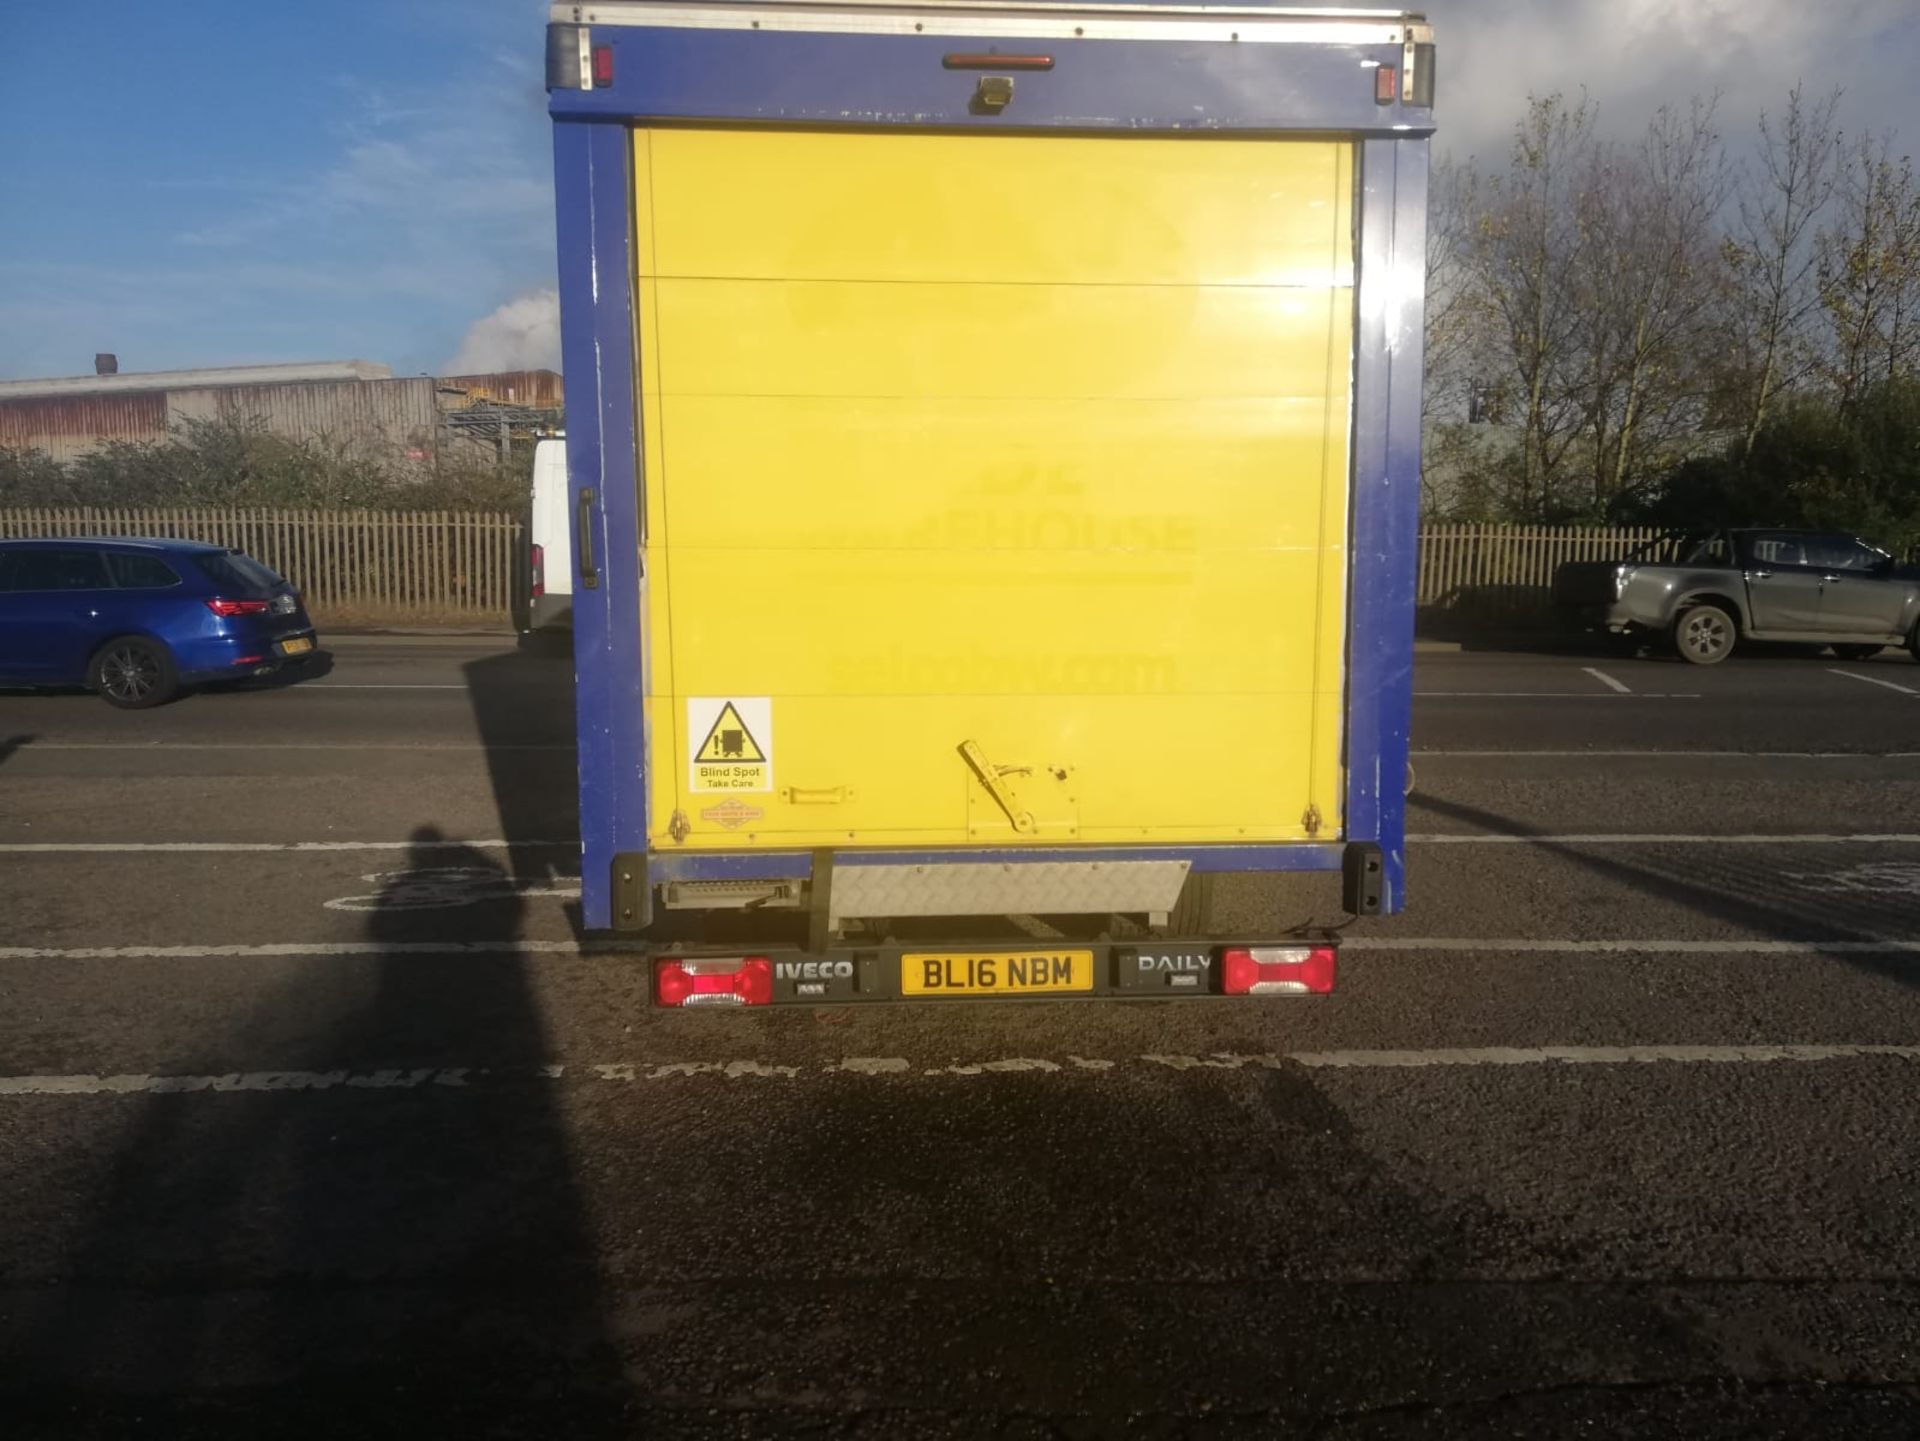 2016 16 IVECO CURTAIN SIDER - 128K MILES - LWB - TWIN REAR WHEEL - BL16 NBM - Image 6 of 10